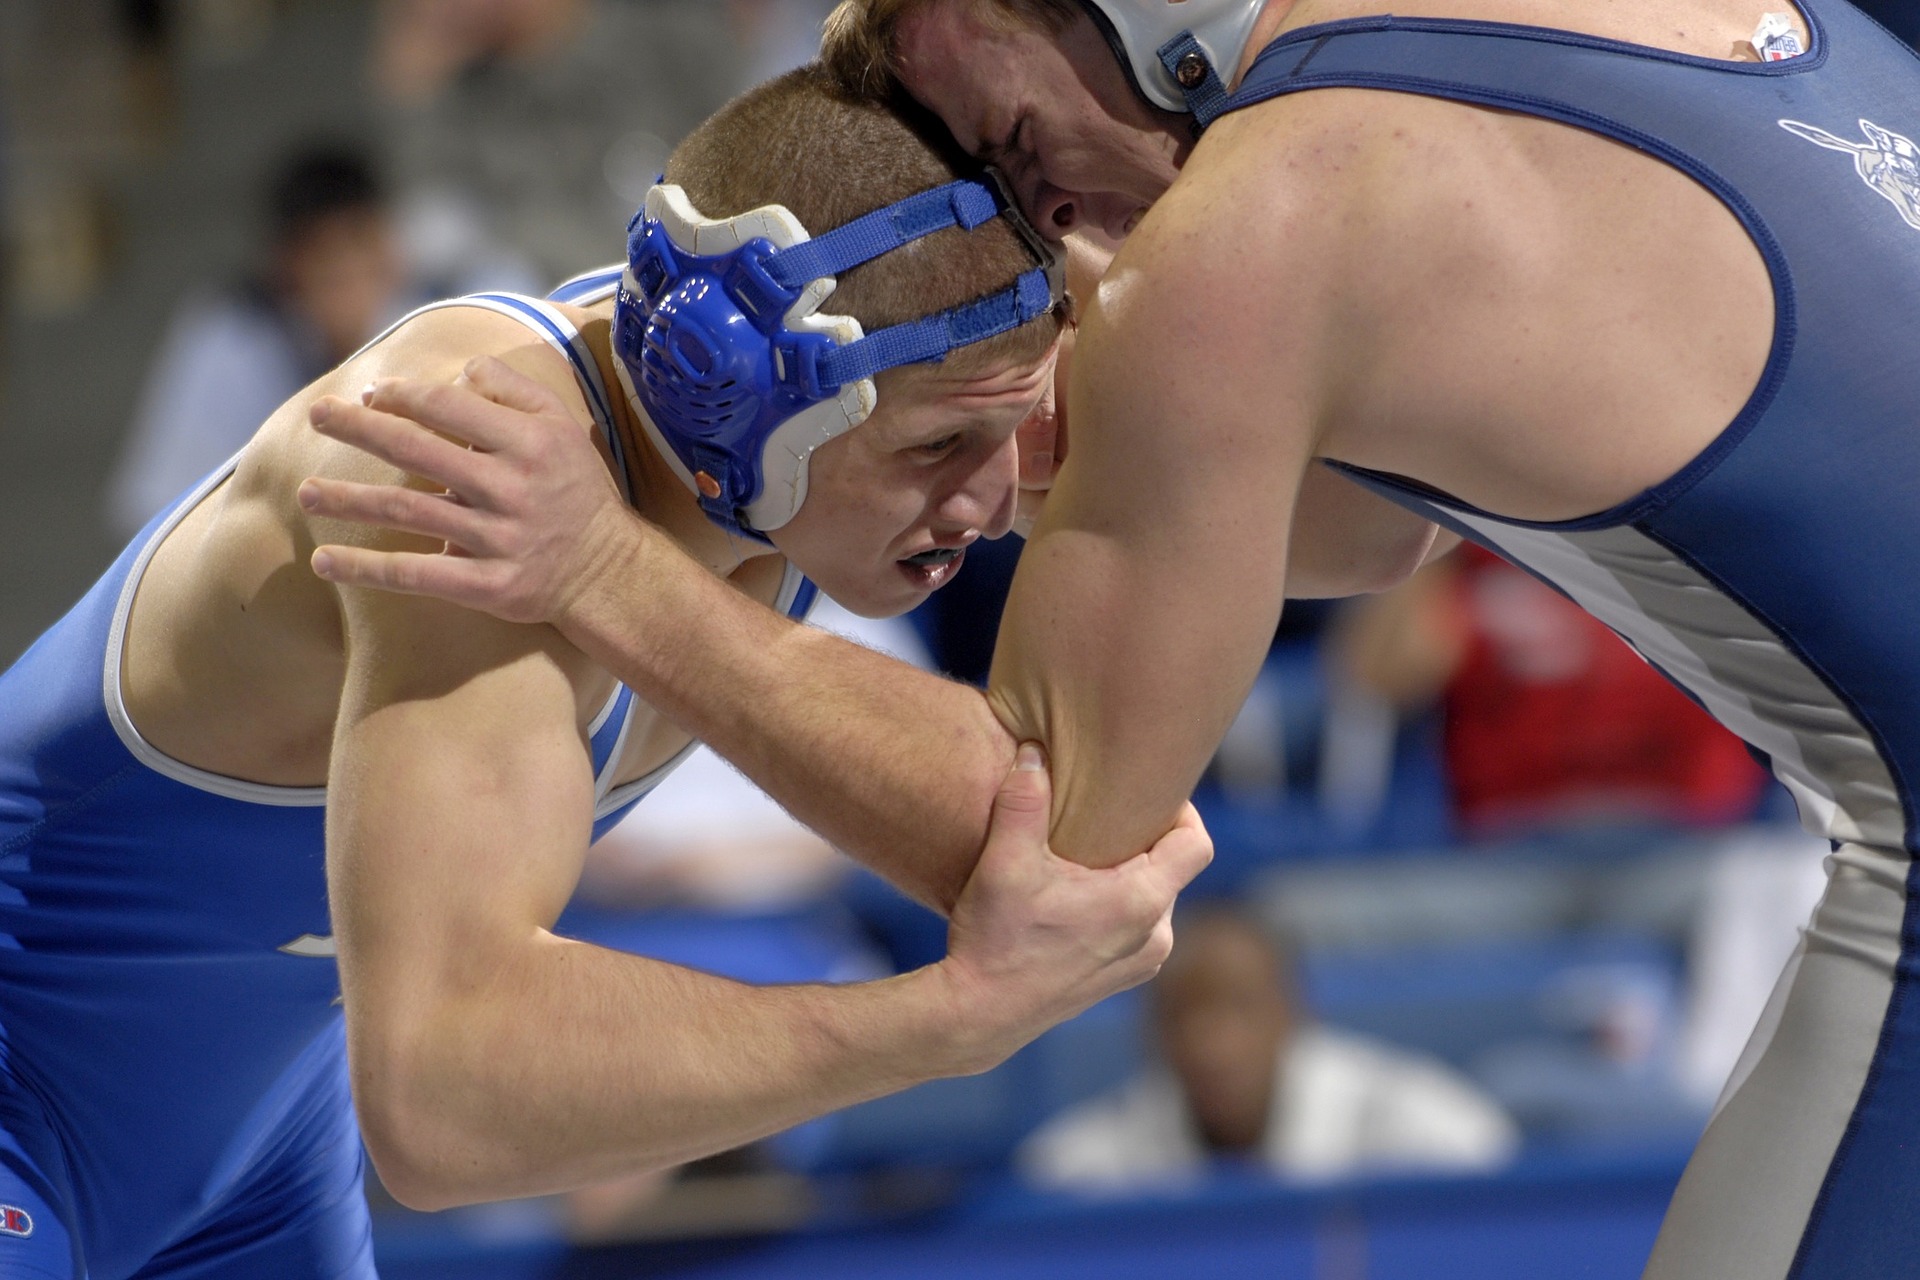 Eating disorders affect college athletes at an alarming rate. This image shows two college wrestlers, a common sport where eating disorders are prevalent.